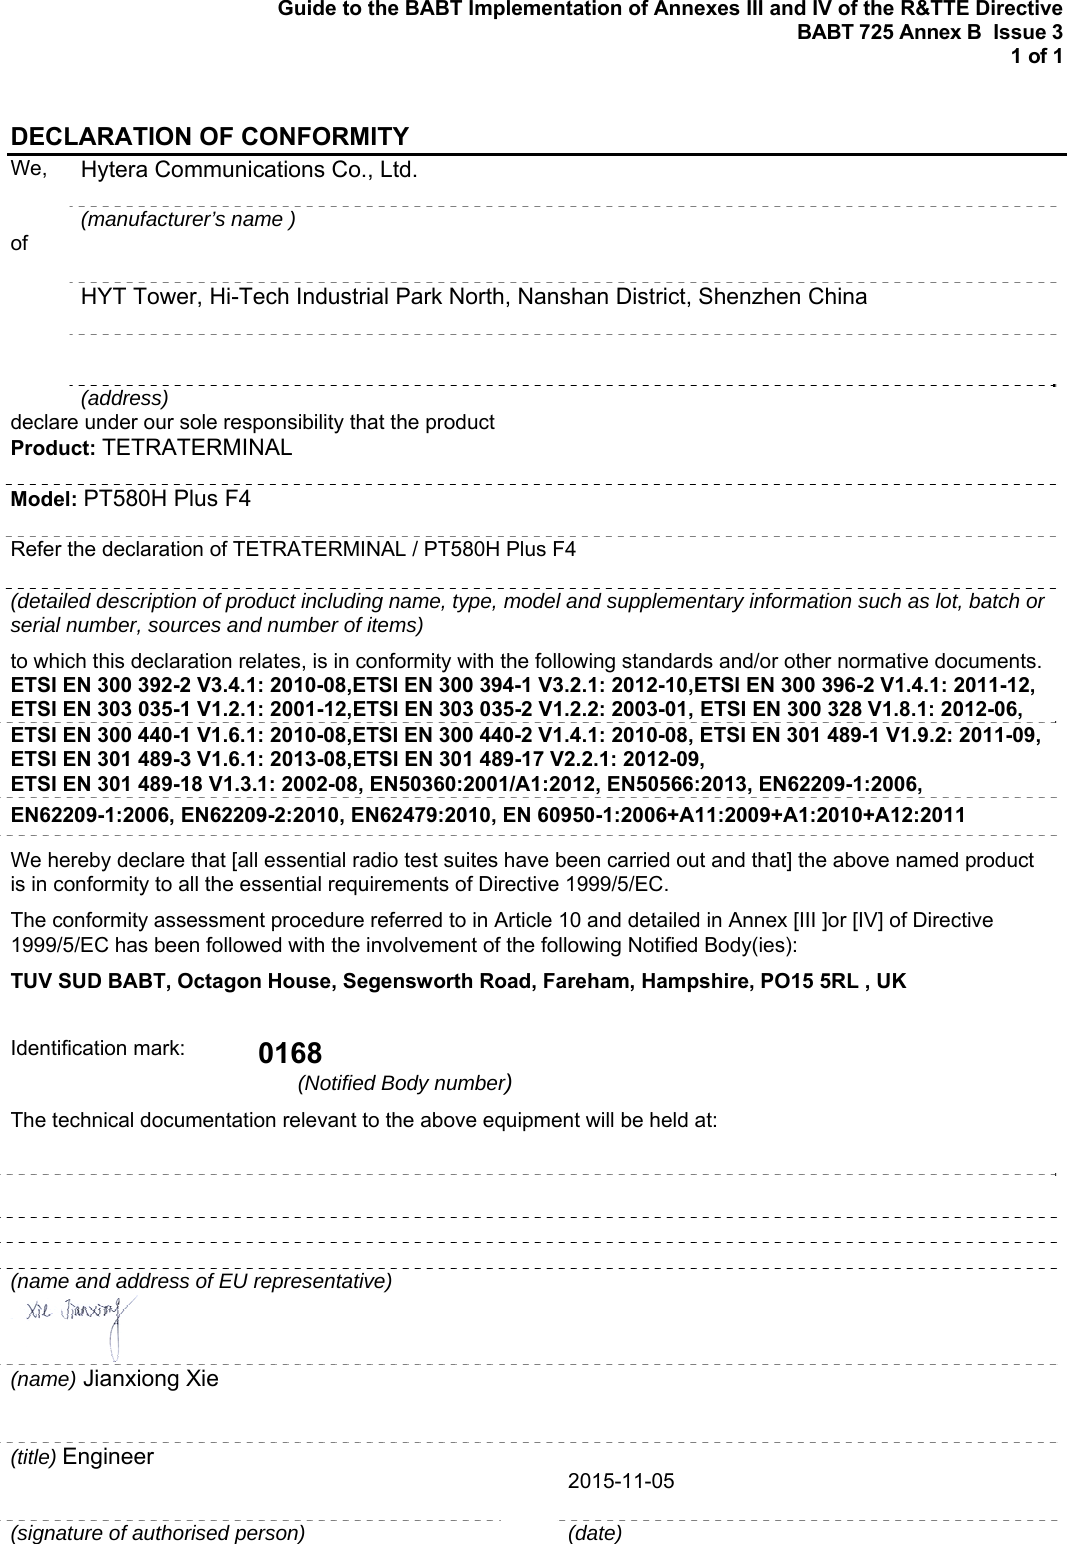 Guide to the BABT Implementation of Annexes III and IV of the R&amp;TTE Directive BABT 725 Annex B  Issue 3  1 of 1  DECLARATION OF CONFORMITY We,   Hytera Communications Co., Ltd.  (manufacturer’s name ) of    HYT Tower, Hi-Tech Industrial Park North, Nanshan District, Shenzhen China    (address) declare under our sole responsibility that the product Product: TETRATERMINAL Model: PT580H Plus F4 Refer the declaration of TETRATERMINAL / PT580H Plus F4 (detailed description of product including name, type, model and supplementary information such as lot, batch or serial number, sources and number of items) to which this declaration relates, is in conformity with the following standards and/or other normative documents.ETSI EN 300 392-2 V3.4.1: 2010-08,ETSI EN 300 394-1 V3.2.1: 2012-10,ETSI EN 300 396-2 V1.4.1: 2011-12, ETSI EN 303 035-1 V1.2.1: 2001-12,ETSI EN 303 035-2 V1.2.2: 2003-01, ETSI EN 300 328 V1.8.1: 2012-06, ETSI EN 300 440-1 V1.6.1: 2010-08,ETSI EN 300 440-2 V1.4.1: 2010-08, ETSI EN 301 489-1 V1.9.2: 2011-09, ETSI EN 301 489-3 V1.6.1: 2013-08,ETSI EN 301 489-17 V2.2.1: 2012-09, ETSI EN 301 489-18 V1.3.1: 2002-08, EN50360:2001/A1:2012, EN50566:2013, EN62209-1:2006,  EN62209-1:2006, EN62209-2:2010, EN62479:2010, EN 60950-1:2006+A11:2009+A1:2010+A12:2011 We hereby declare that [all essential radio test suites have been carried out and that] the above named product is in conformity to all the essential requirements of Directive 1999/5/EC. The conformity assessment procedure referred to in Article 10 and detailed in Annex [III ]or [IV] of Directive 1999/5/EC has been followed with the involvement of the following Notified Body(ies): TUV SUD BABT, Octagon House, Segensworth Road, Fareham, Hampshire, PO15 5RL , UK  Identification mark:  0168 (Notified Body number)  The technical documentation relevant to the above equipment will be held at:     (name and address of EU representative)    (name) Jianxiong Xie      (title) Engineer      2015-11-05 (signature of authorised person)   (date)  